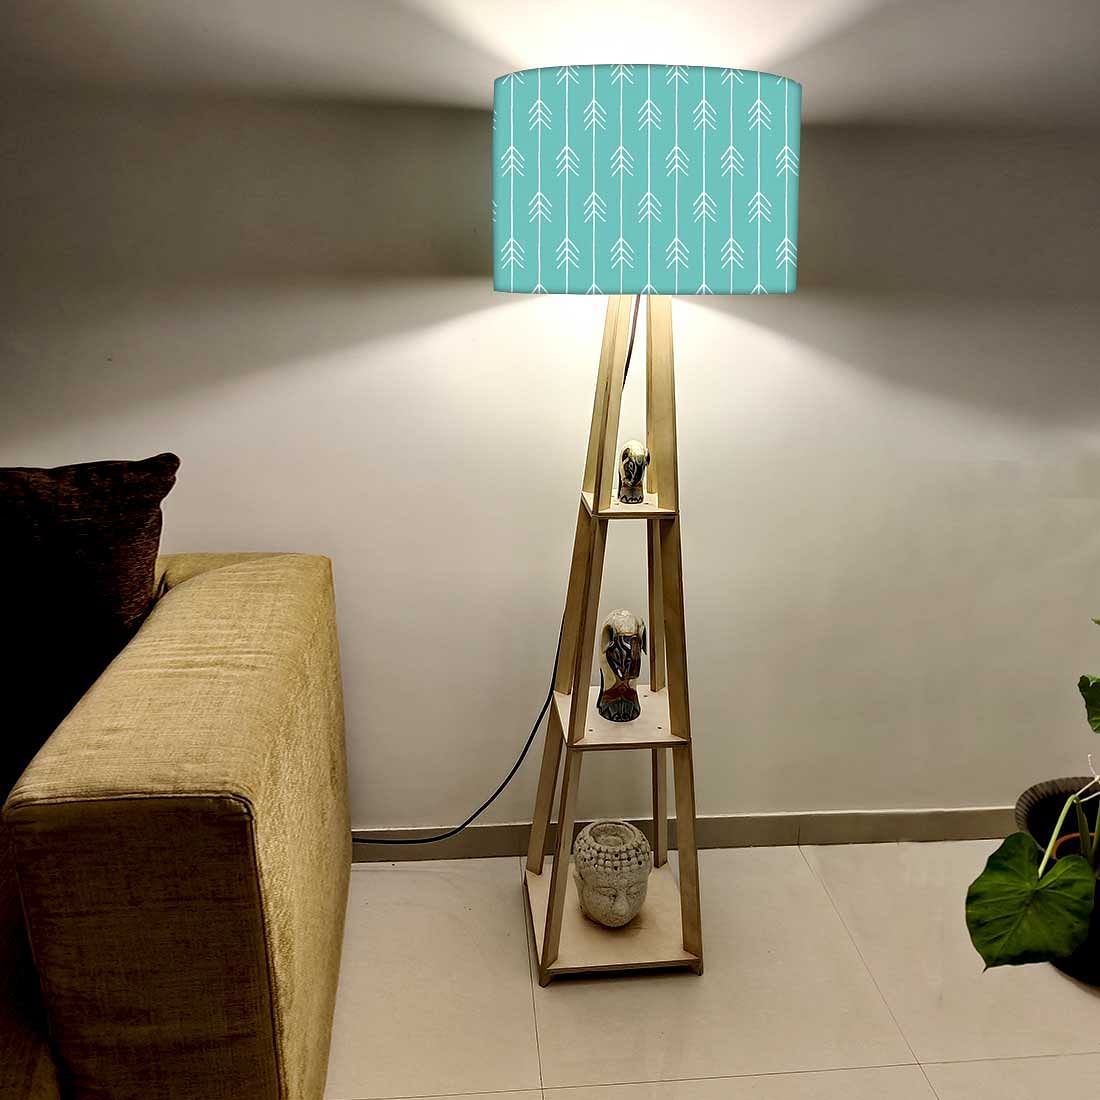 Tall Wooden Standing Lamps  -   Teal Blue Arrows Nutcase